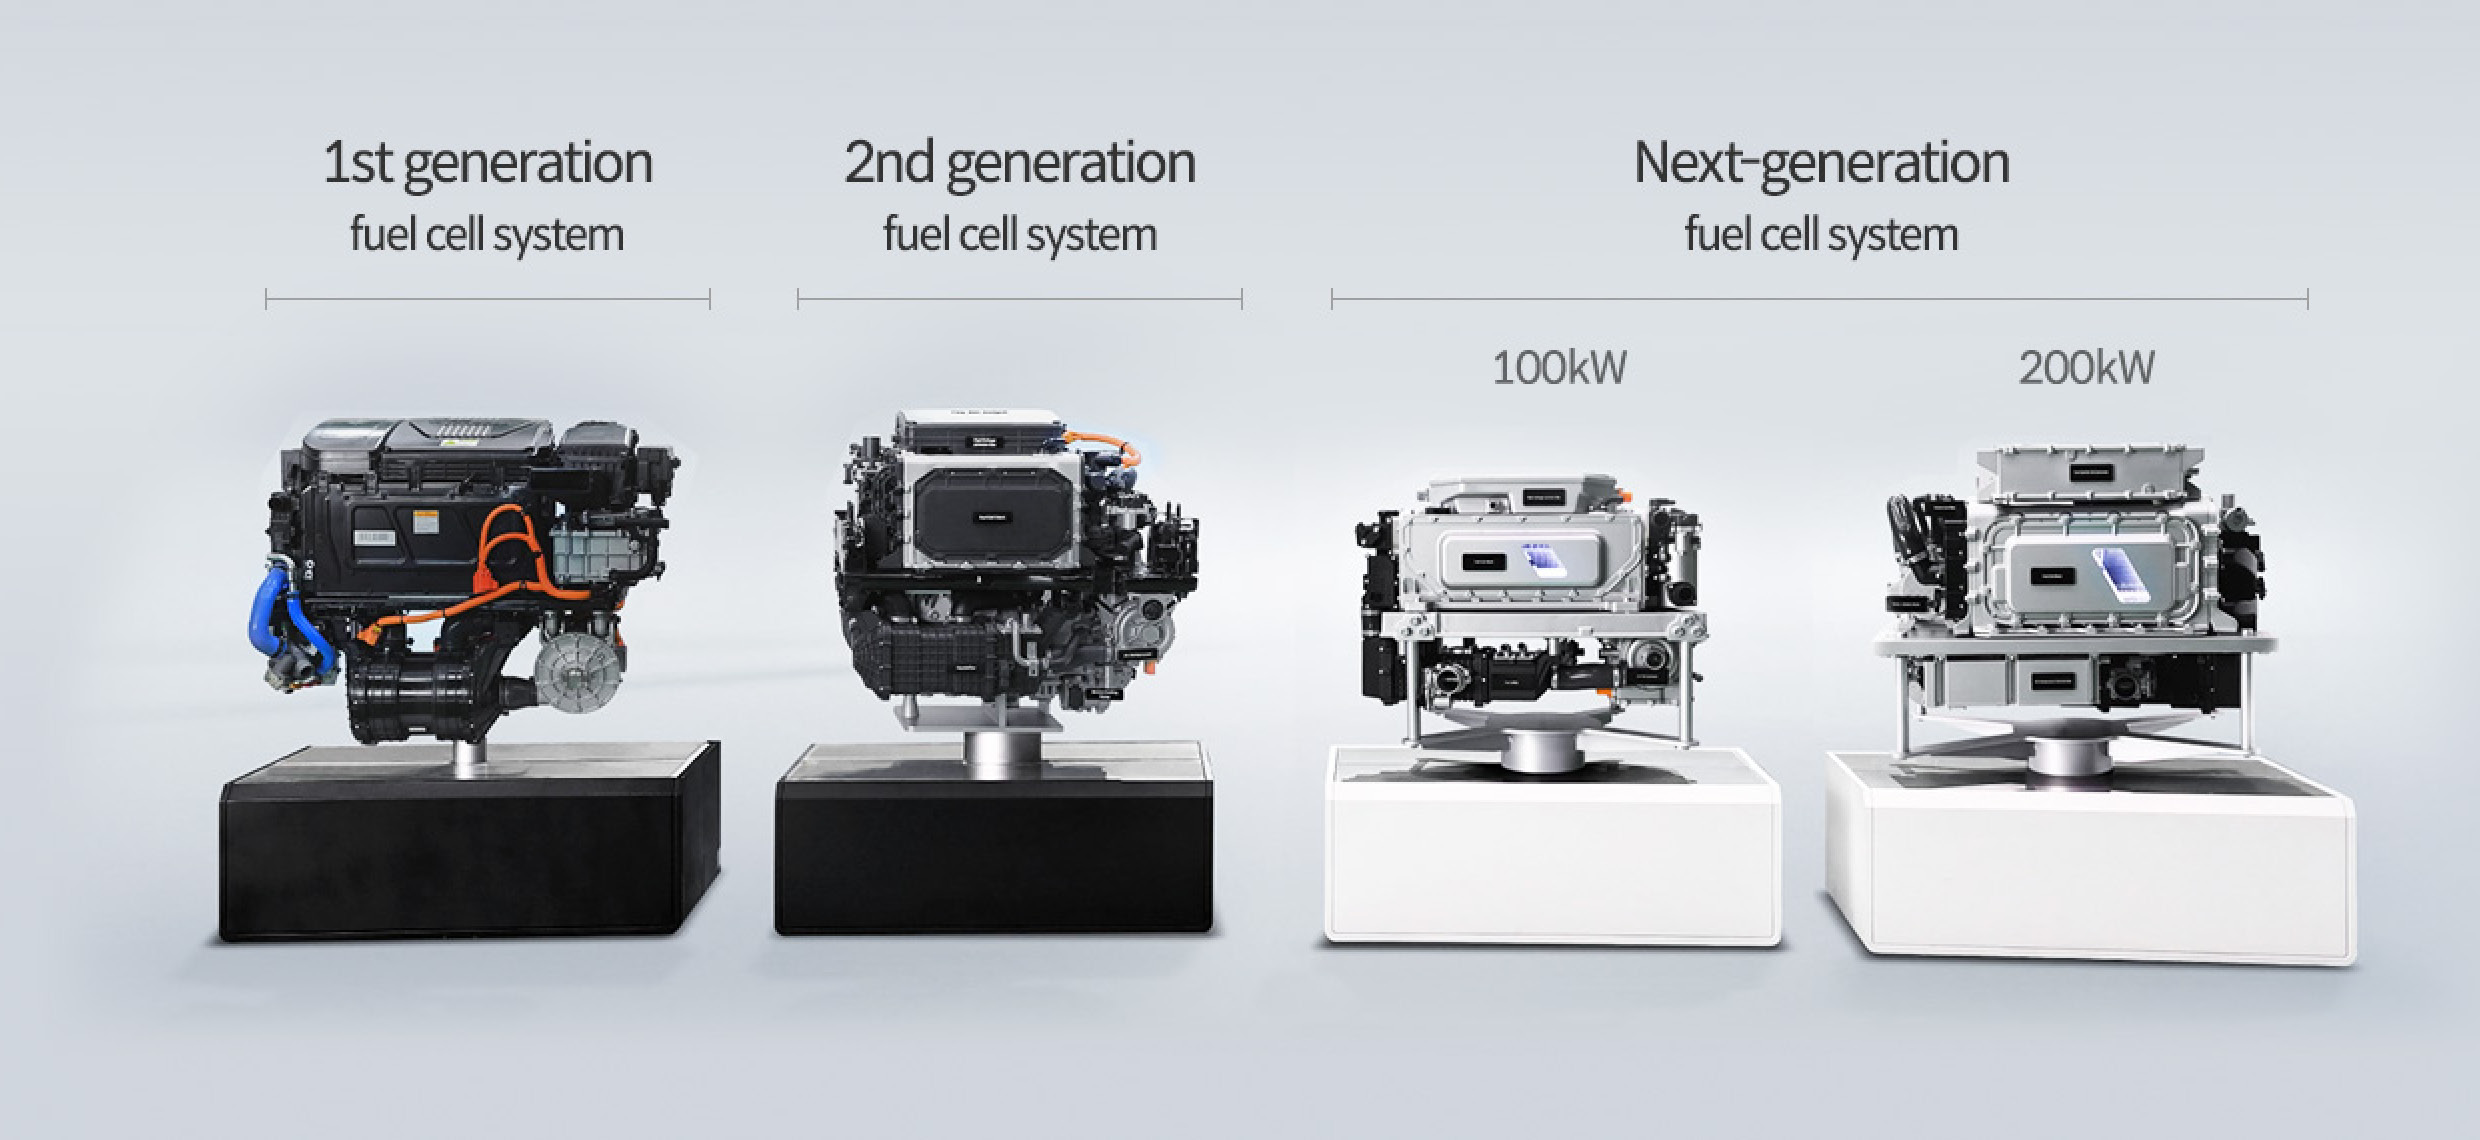 Hyundai Motor Group Fuel Cell System from the Past to the Present